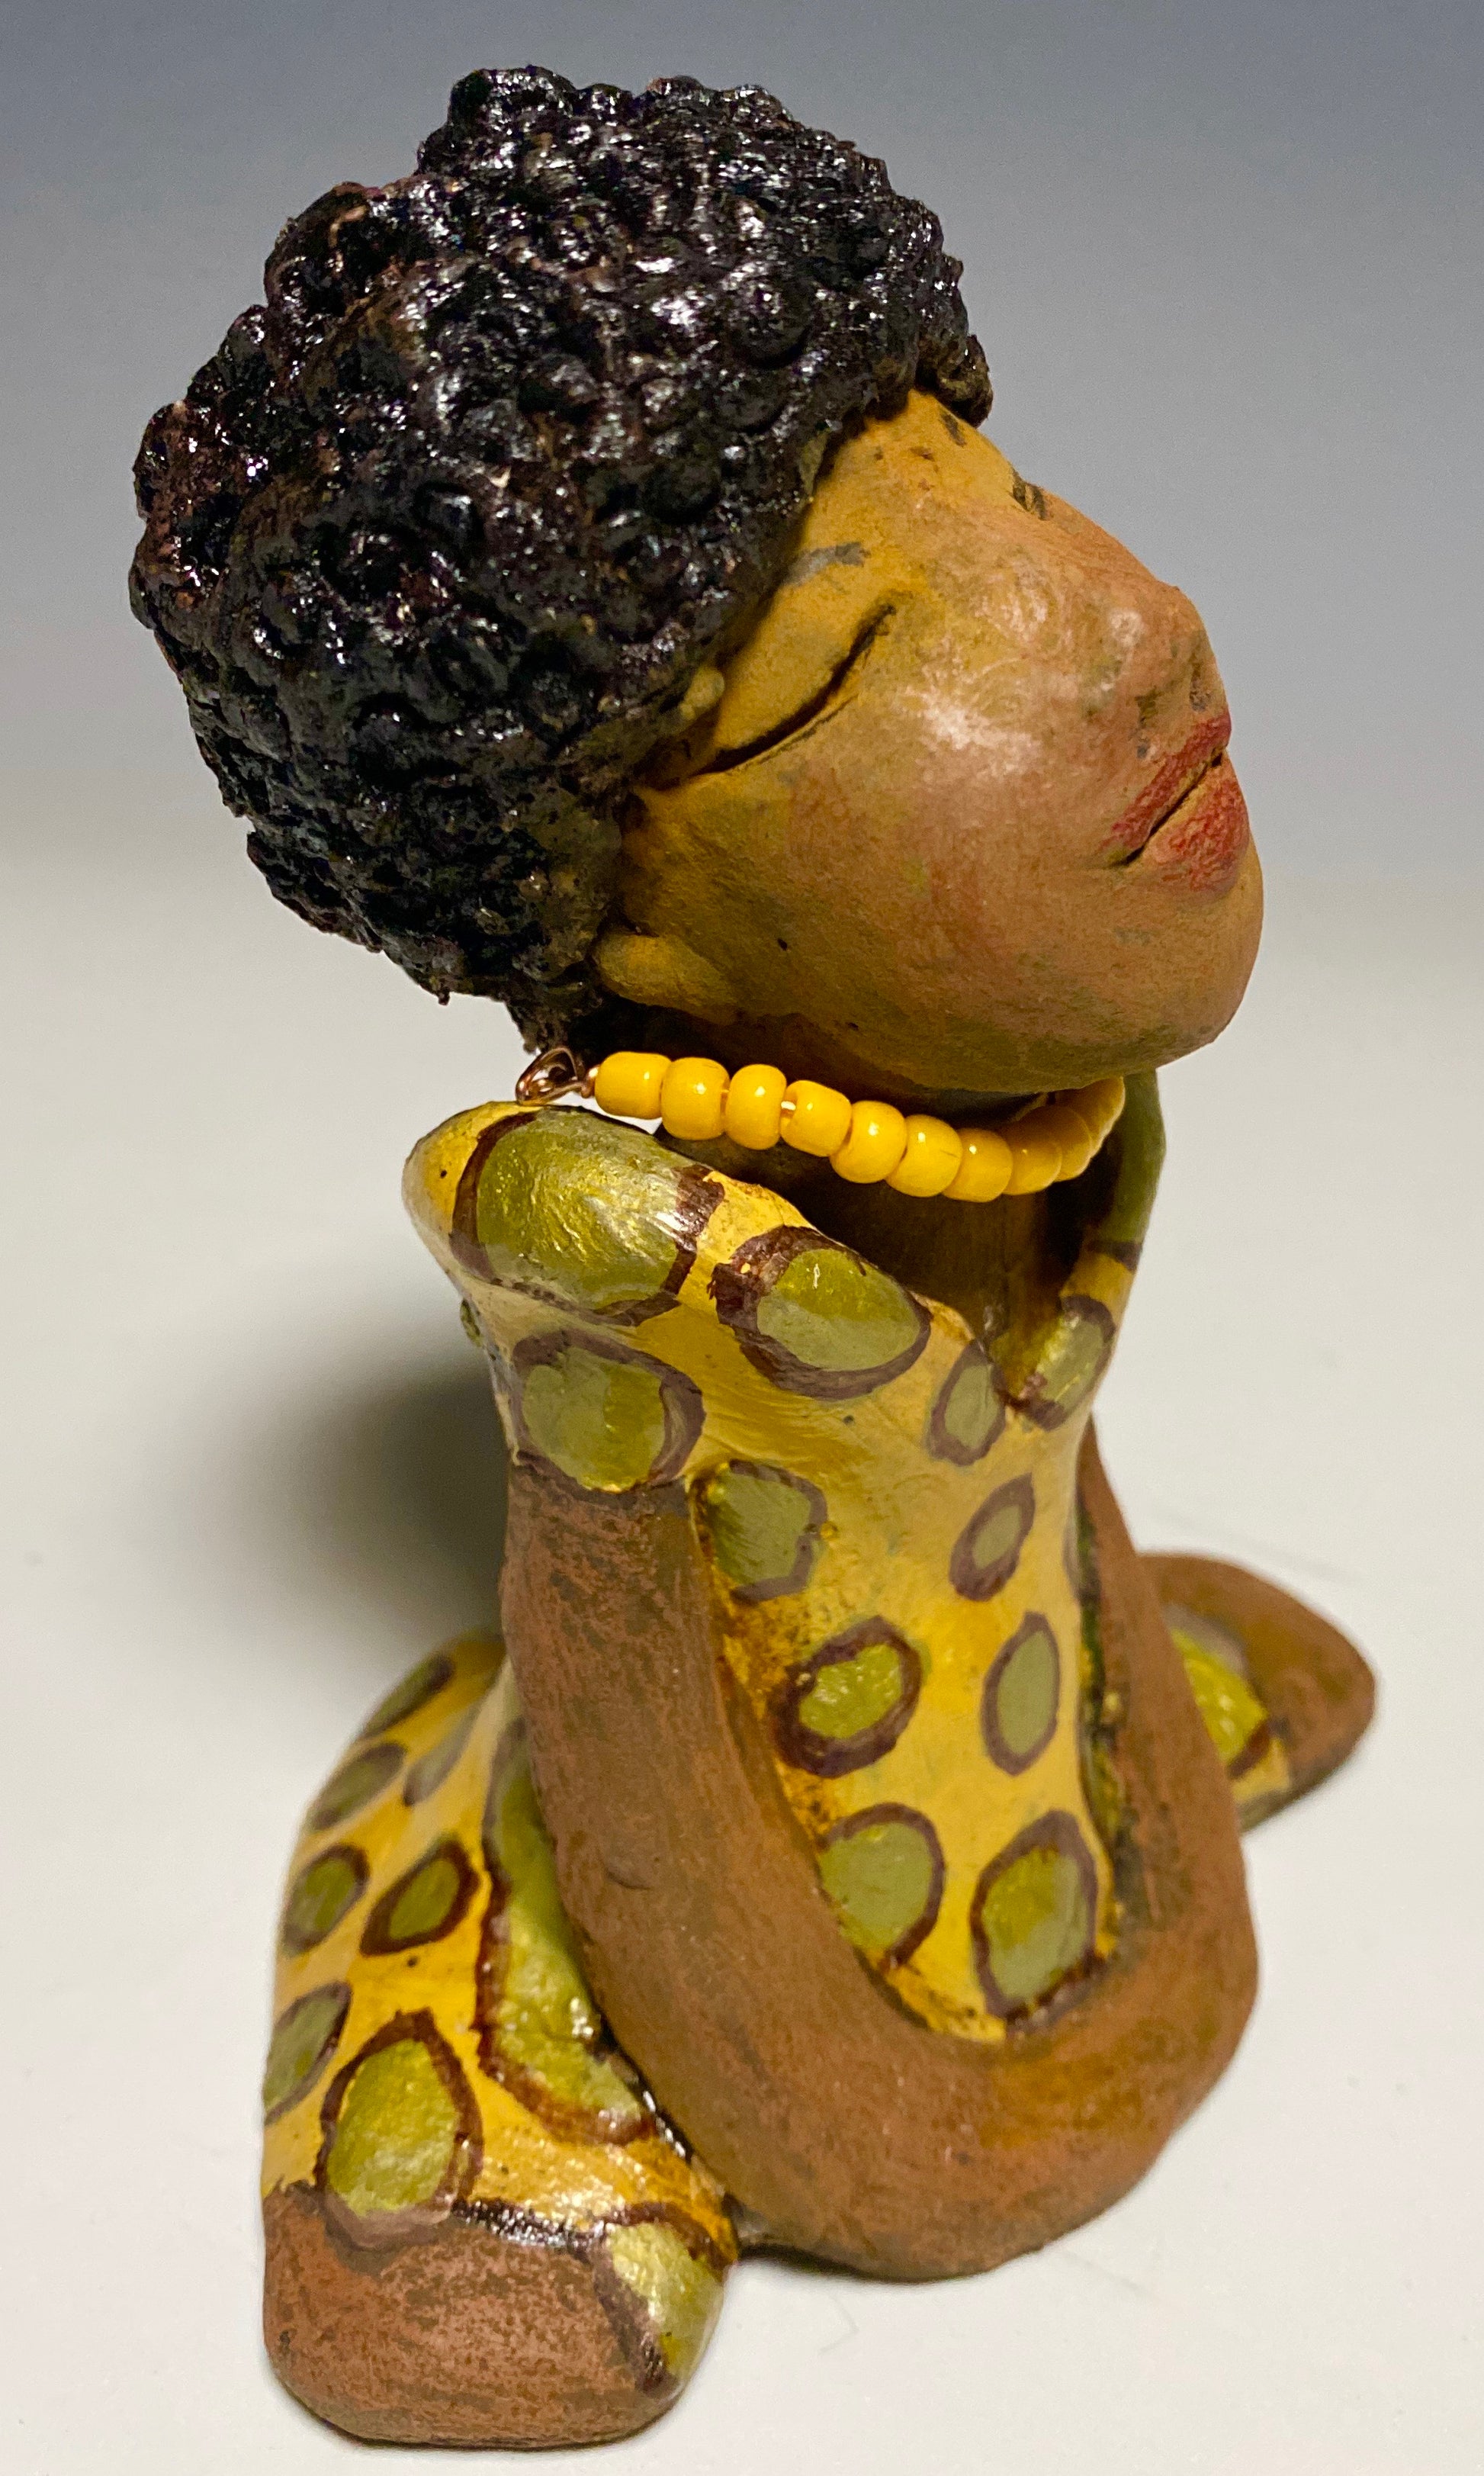 Meet Shelia! Shelia stands" 5 x 4" x 3" and weighs 11 ozs. She wears a cute spotted autumn yellow dress with matching beads. She has a lovely honey brown complexion with an awesome black afro.. Her long loving arms rest at her side. With the current situation we All are going through, Shelia will place a smile on your face during this challenging time. 